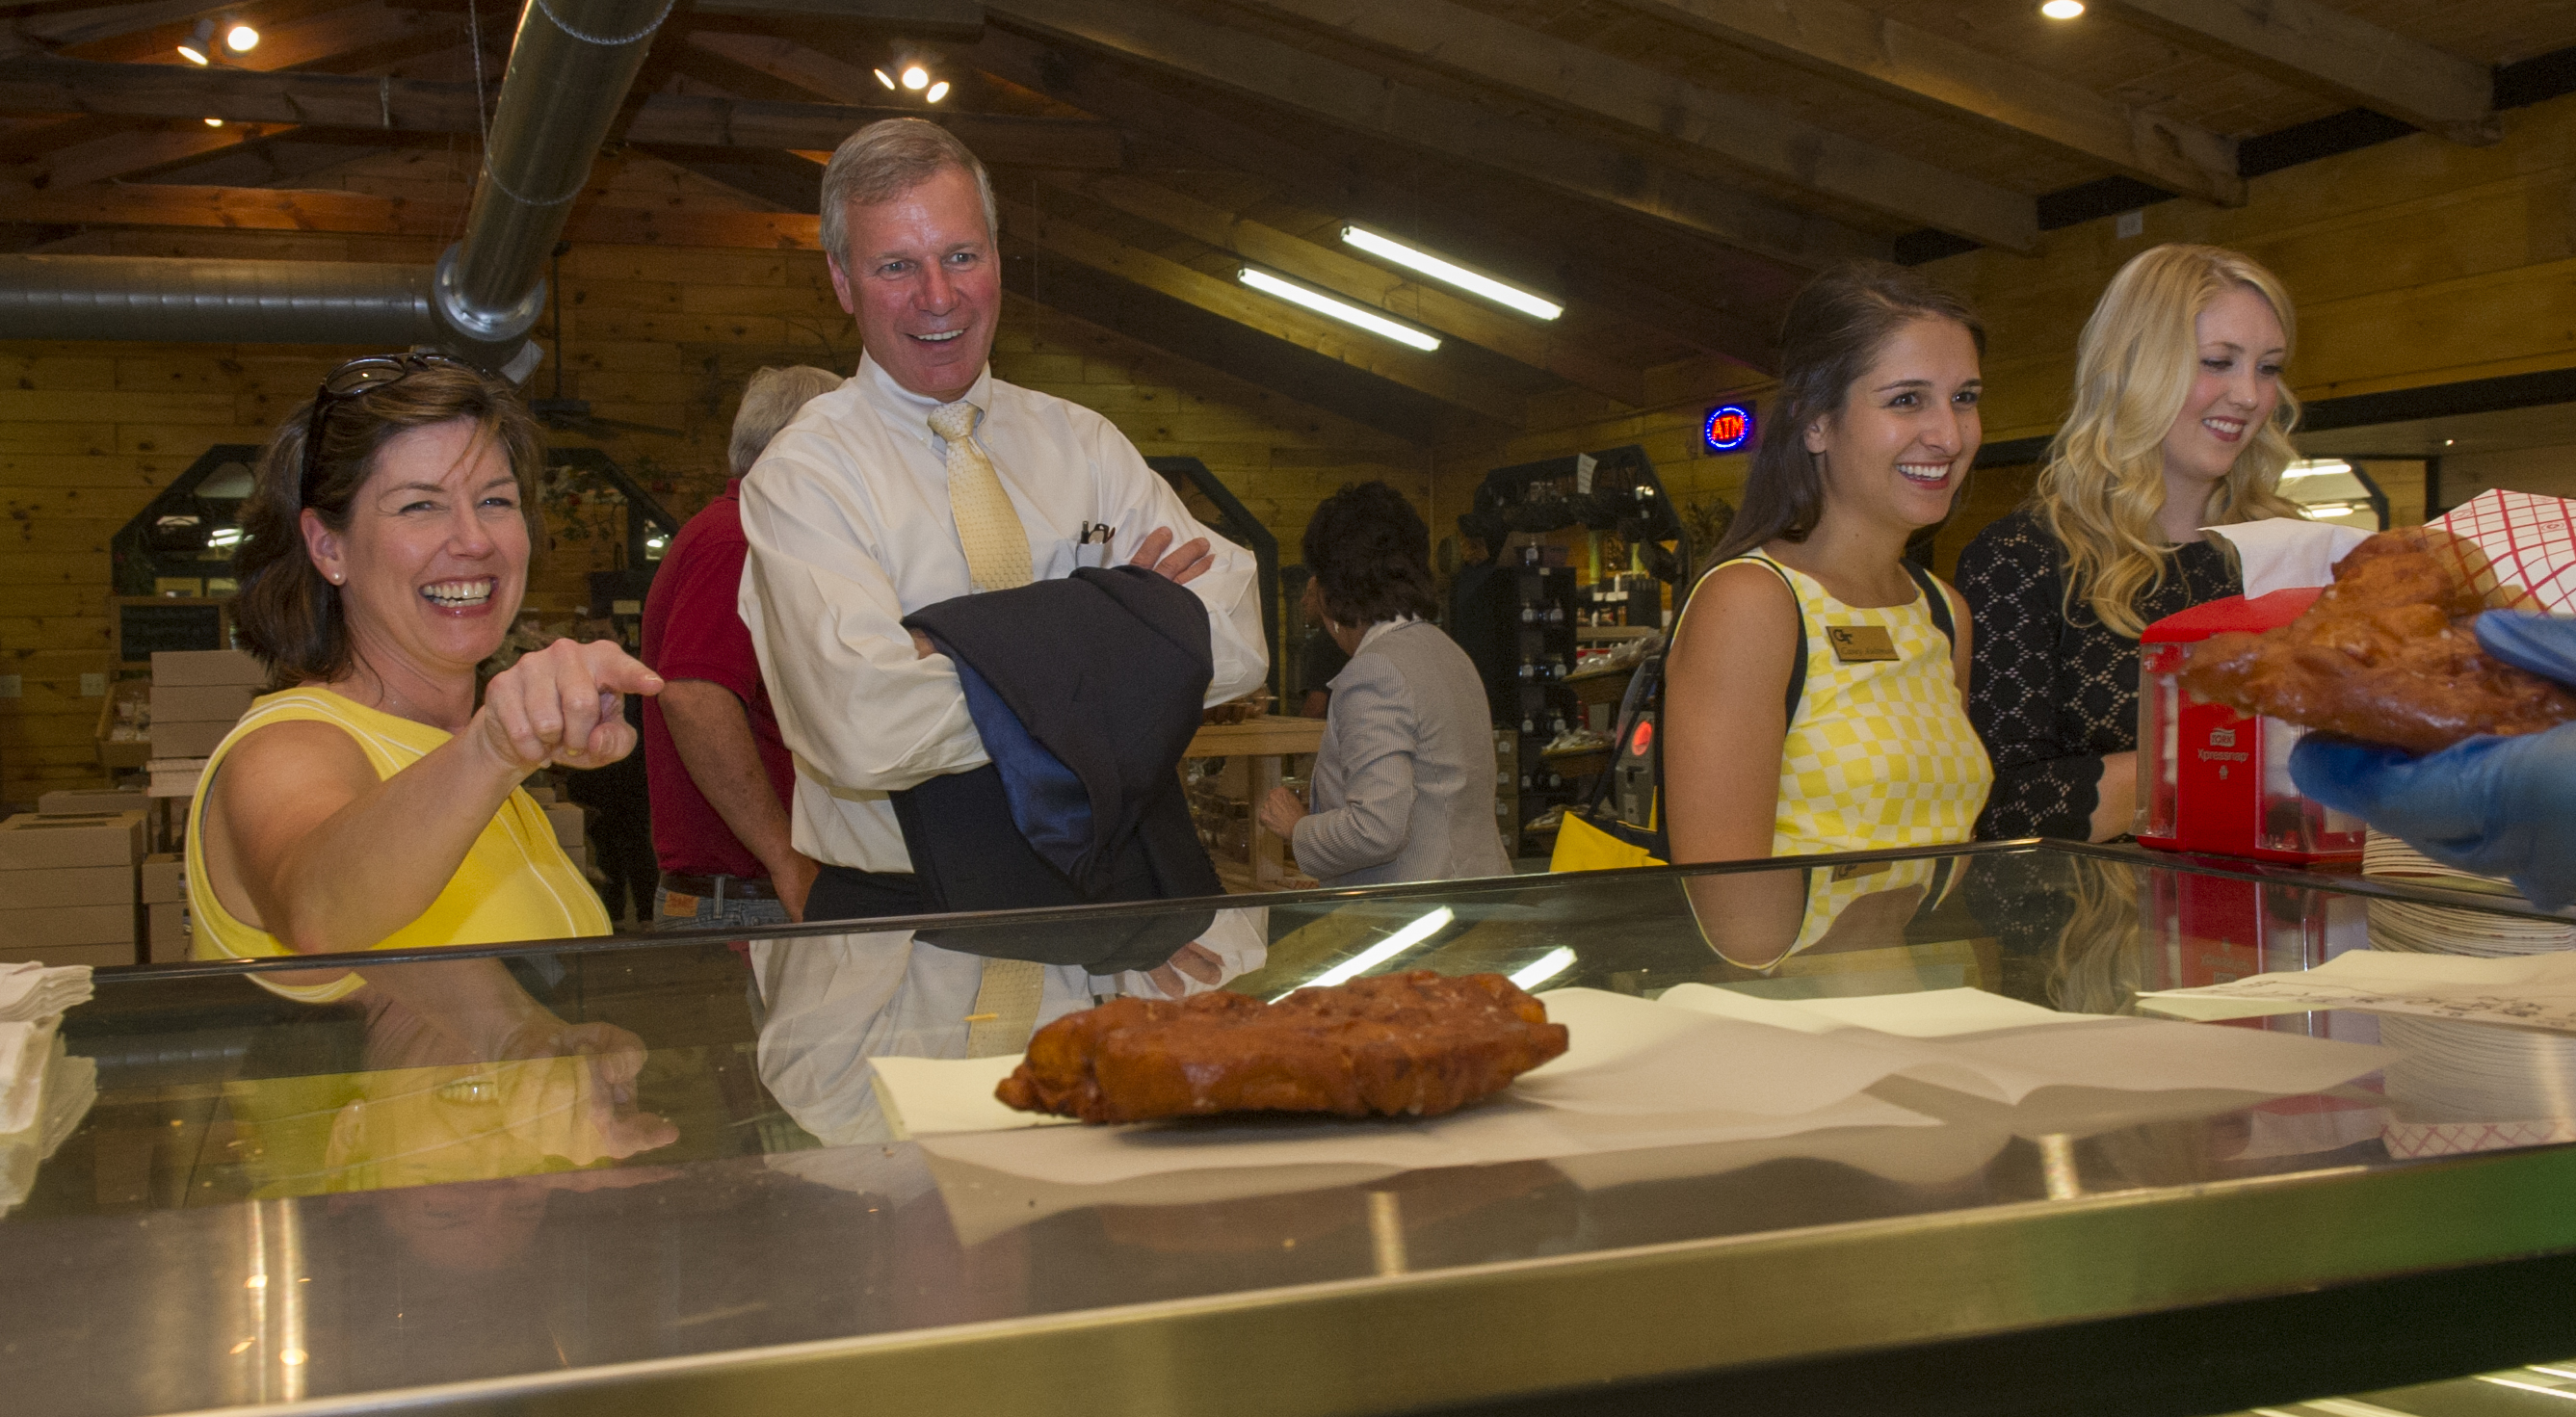 Chief of Staff Lynn Durham orders at Mercier Orchards in Blue Ridge, Georgia as President G.P. "Bud" Peterson watches following a tour of the facility on Thursday, June 18, 2015.